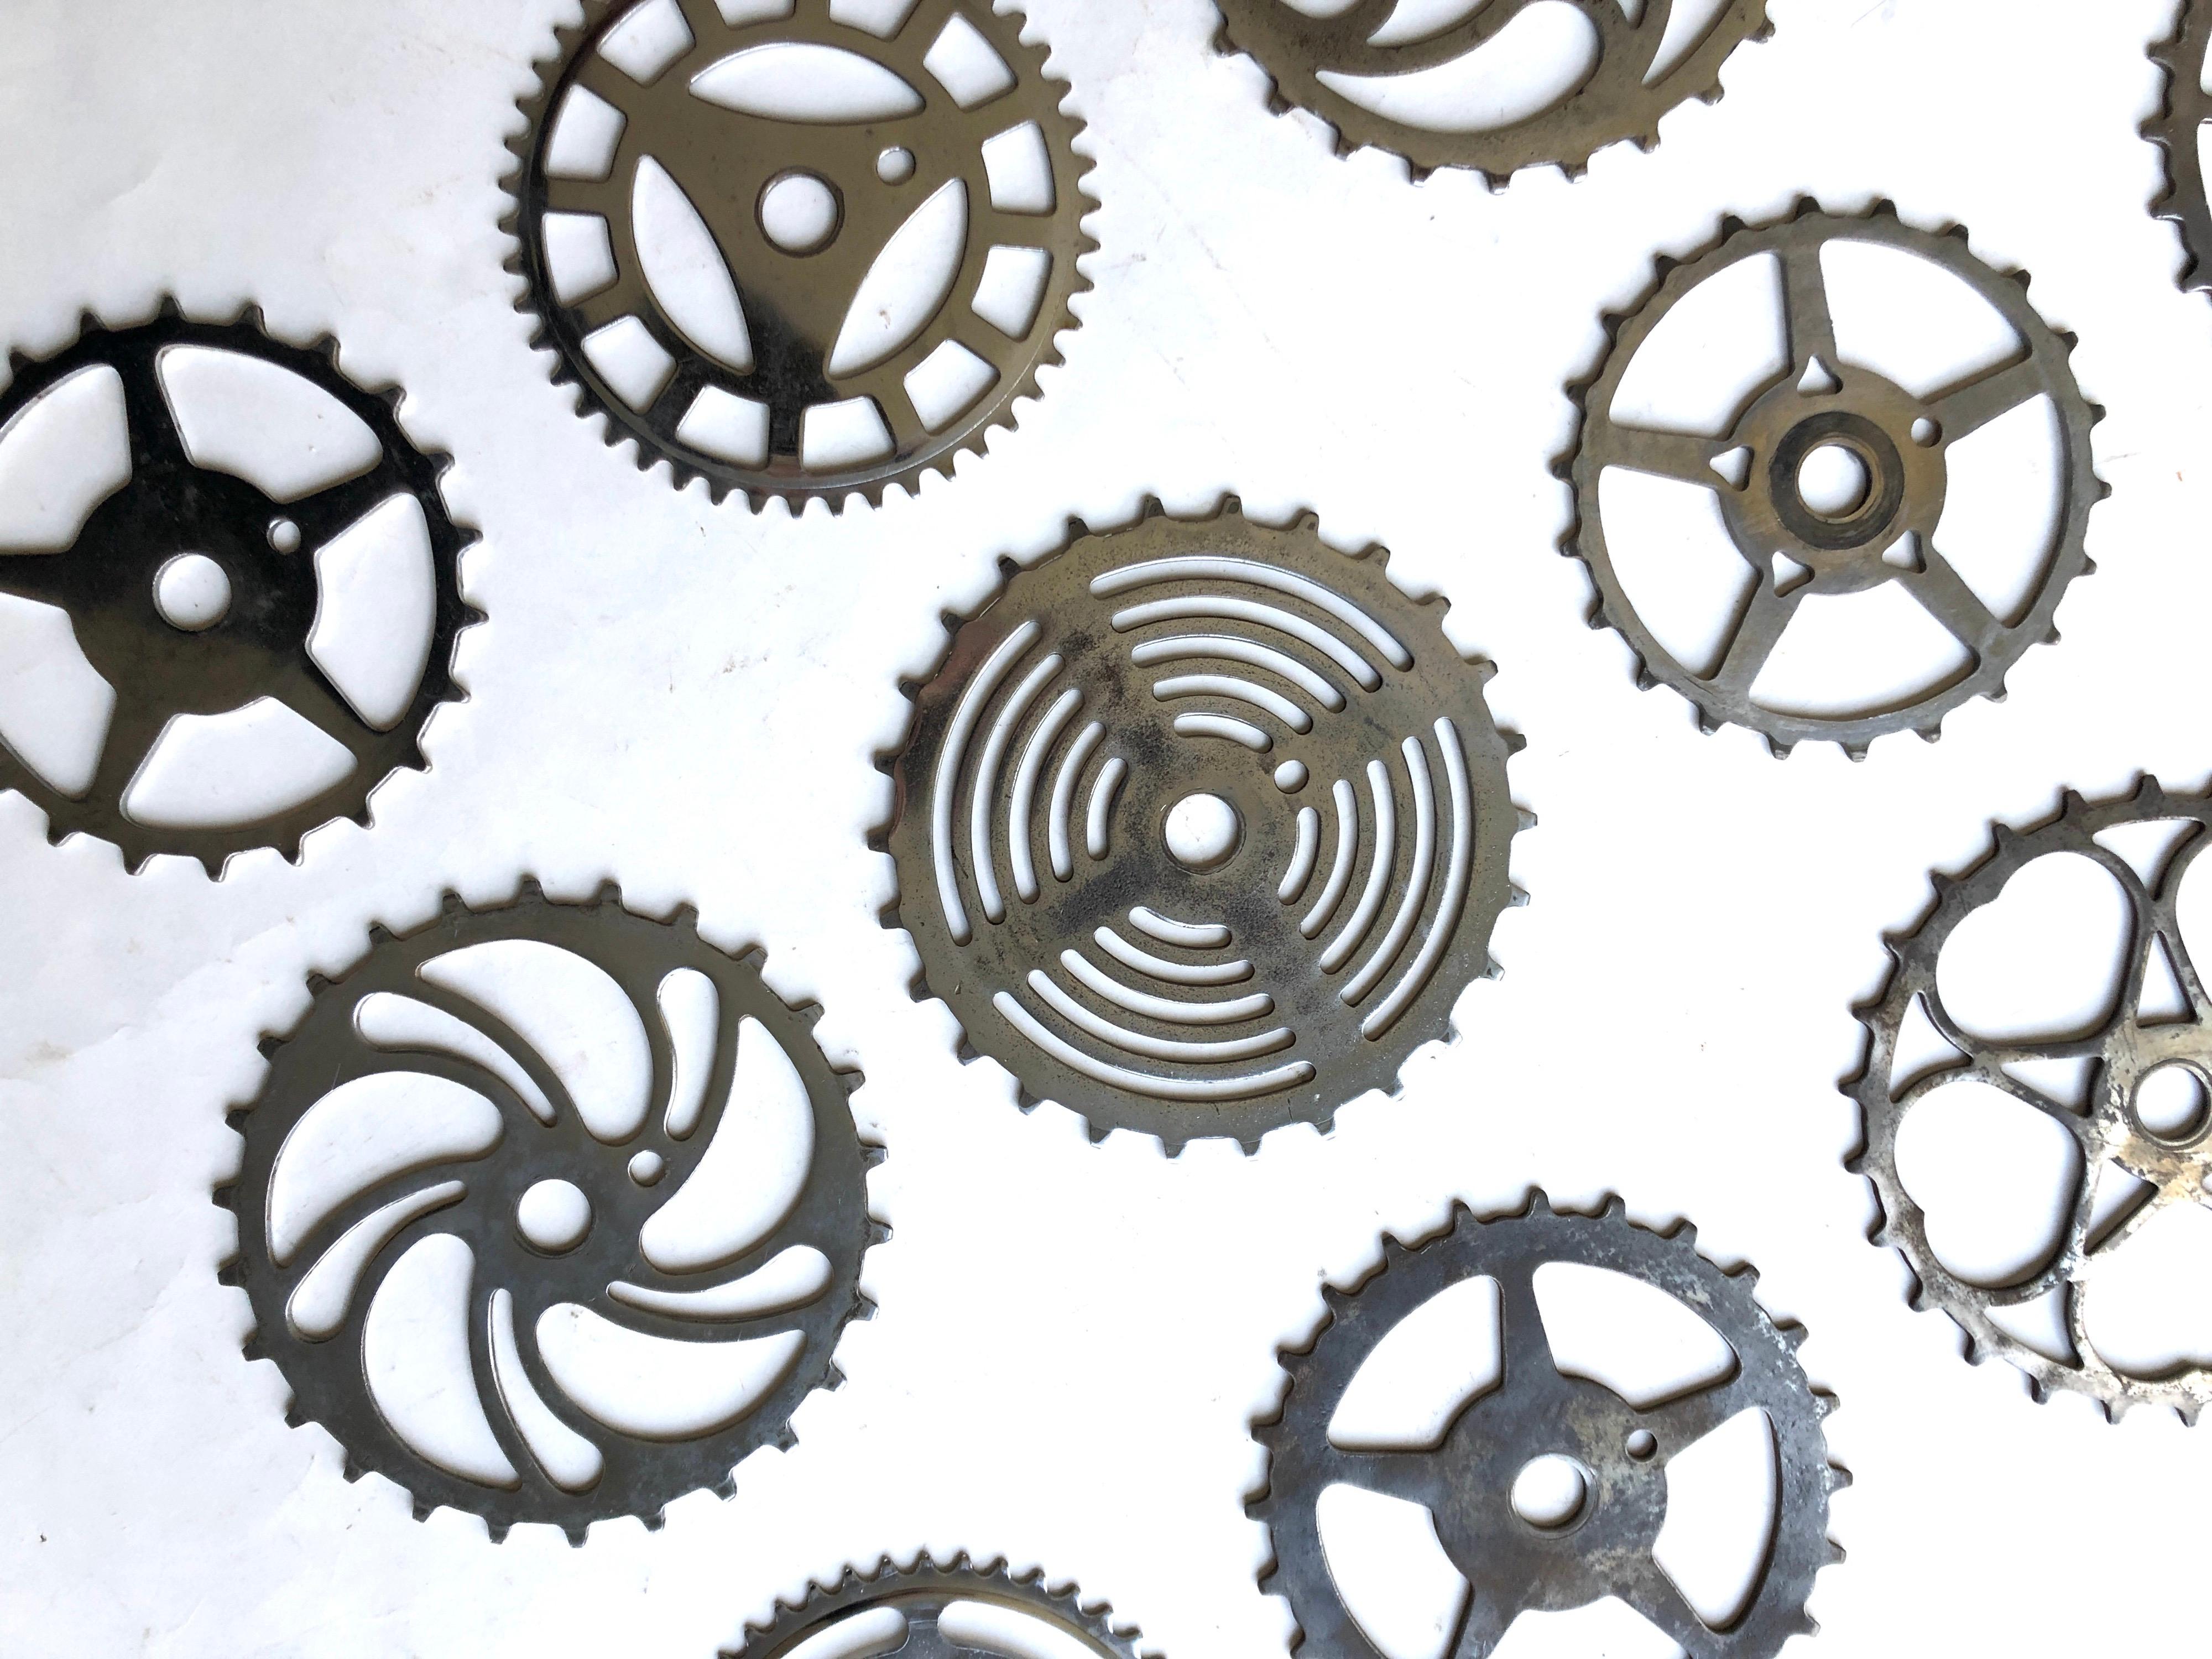 American Collection Of 12 Antique and Vintage Bicycle Sprockets